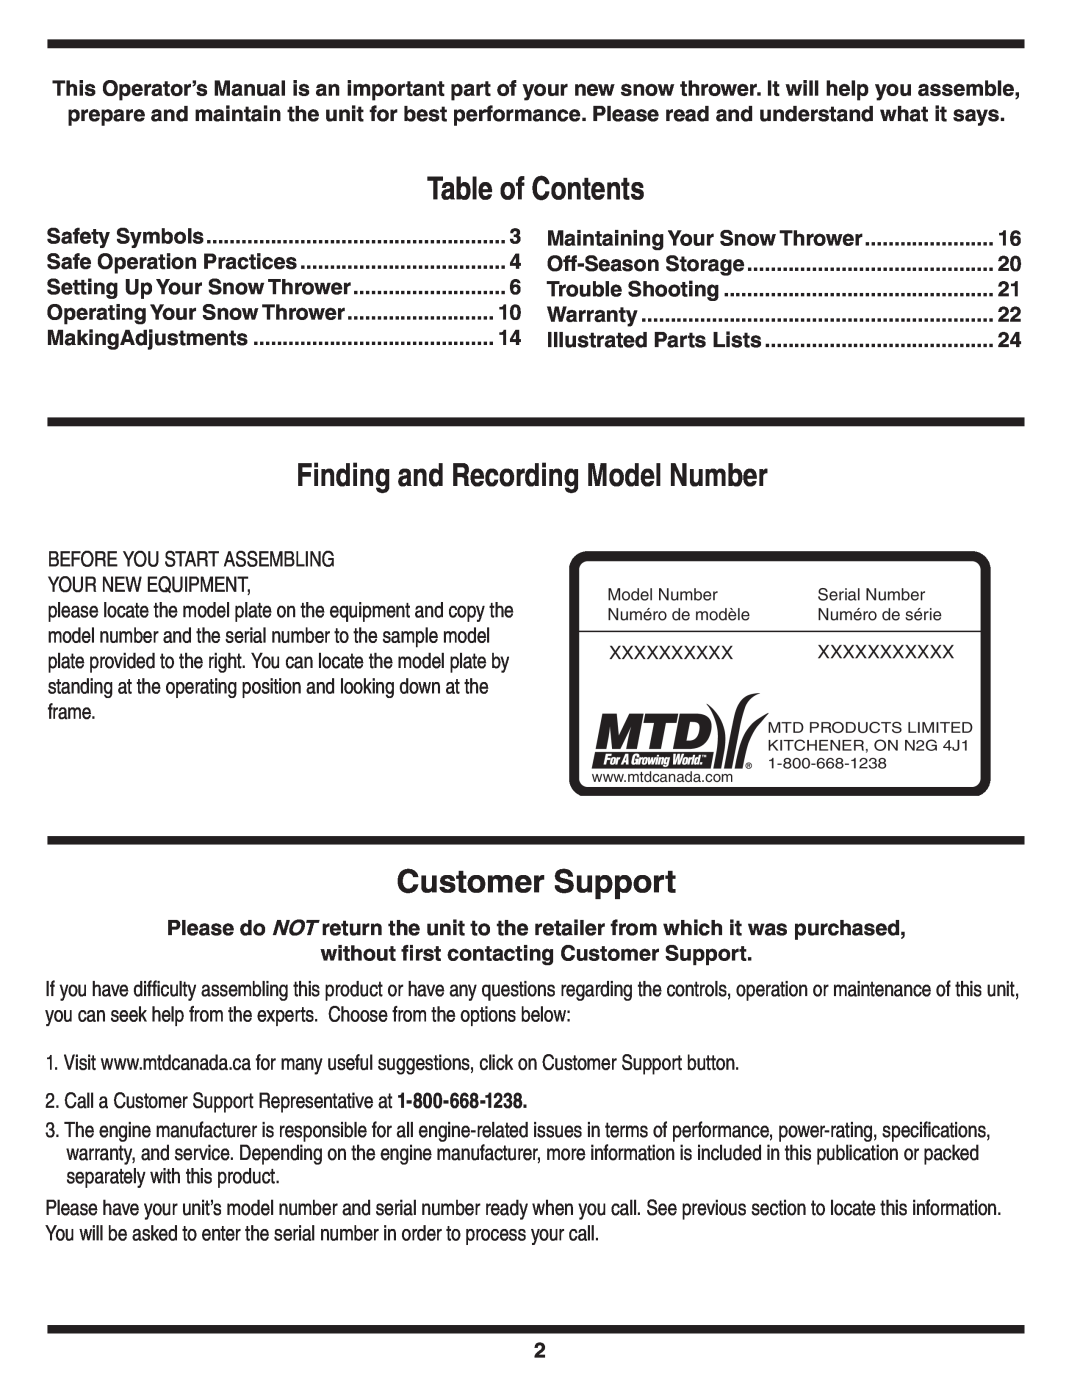 MTD 769-04179 Table of Contents, Finding and Recording Model Number, Customer Support, Safety Symbols, Off-Season Storage 